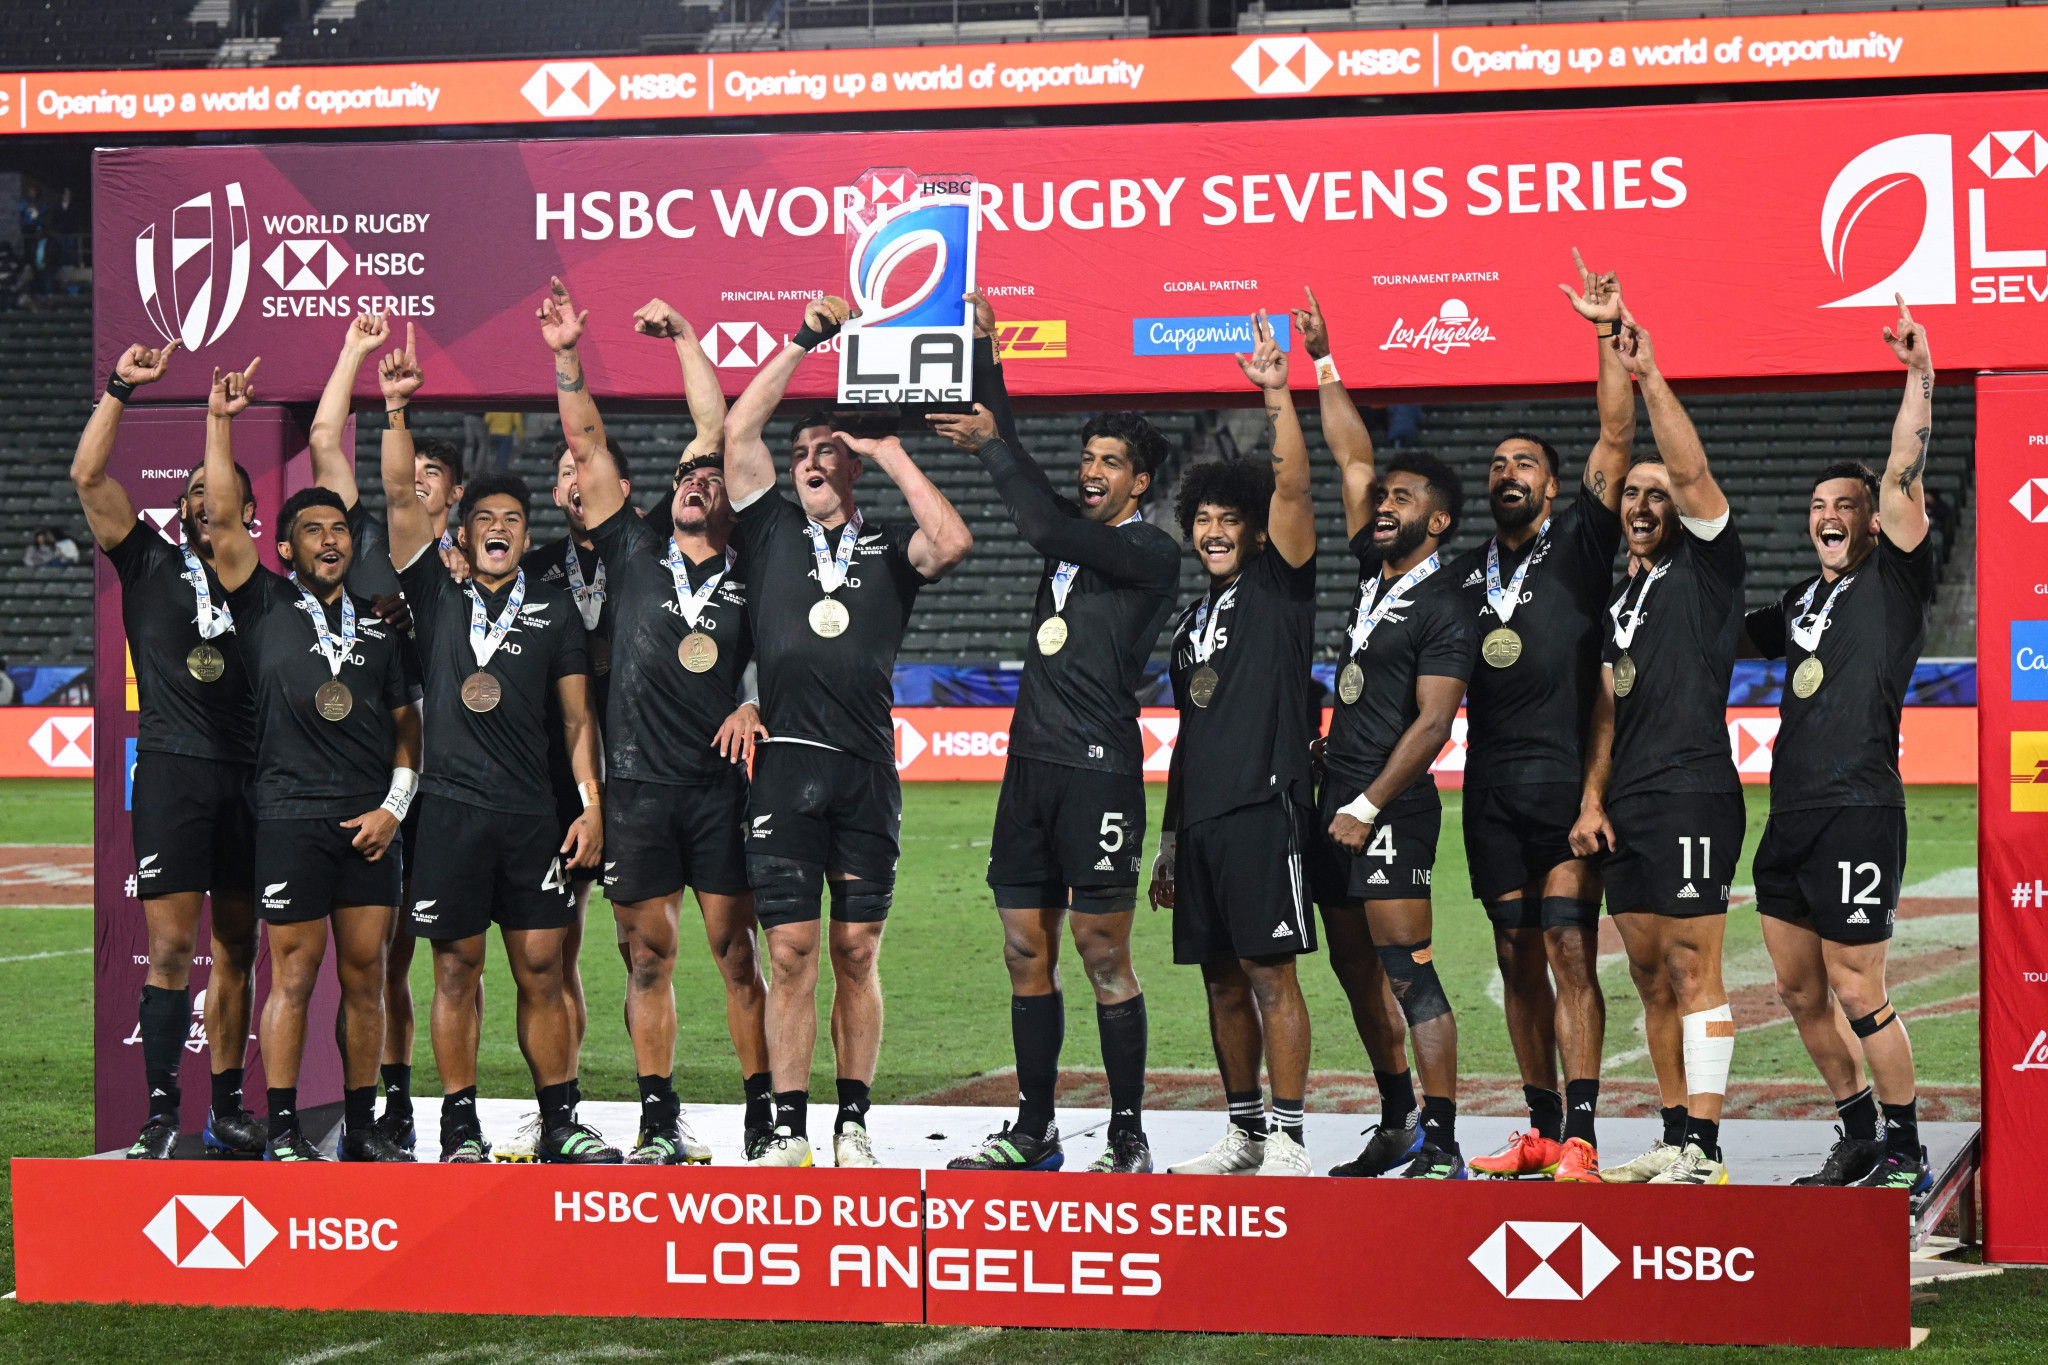 New Zealand celebrate back-to-back victories as they extended their lead in the World Rugby Sevens Series standings ©Getty Images